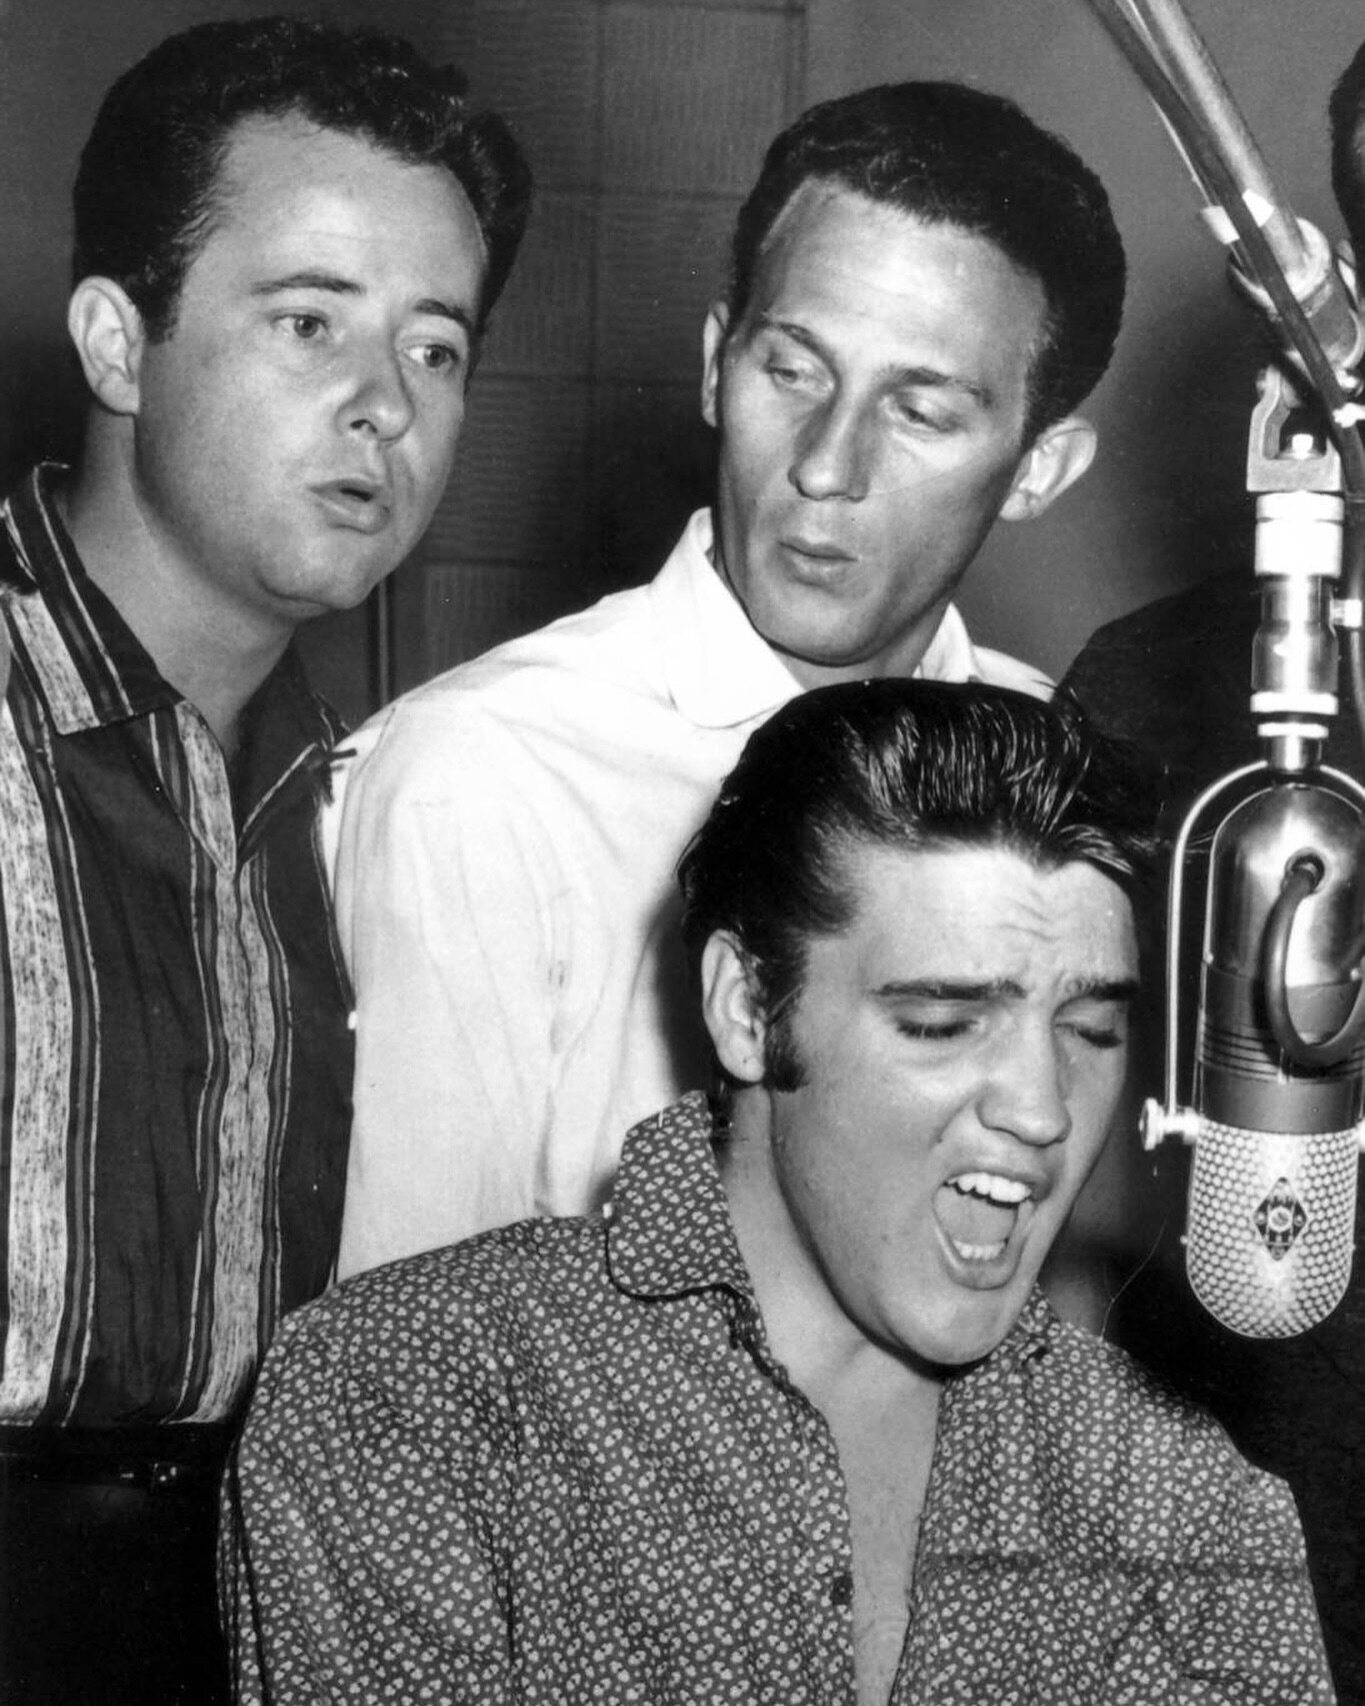 Did you know? 

In the song &lsquo;Good Luck Charm&rsquo; Elvis is joined vocally on the chorus by Gordon Stoker, the first tenor of the Jordanaires.  We got you curious now that you will go give that song a listen. ;)

The song reached #1 on the Bil